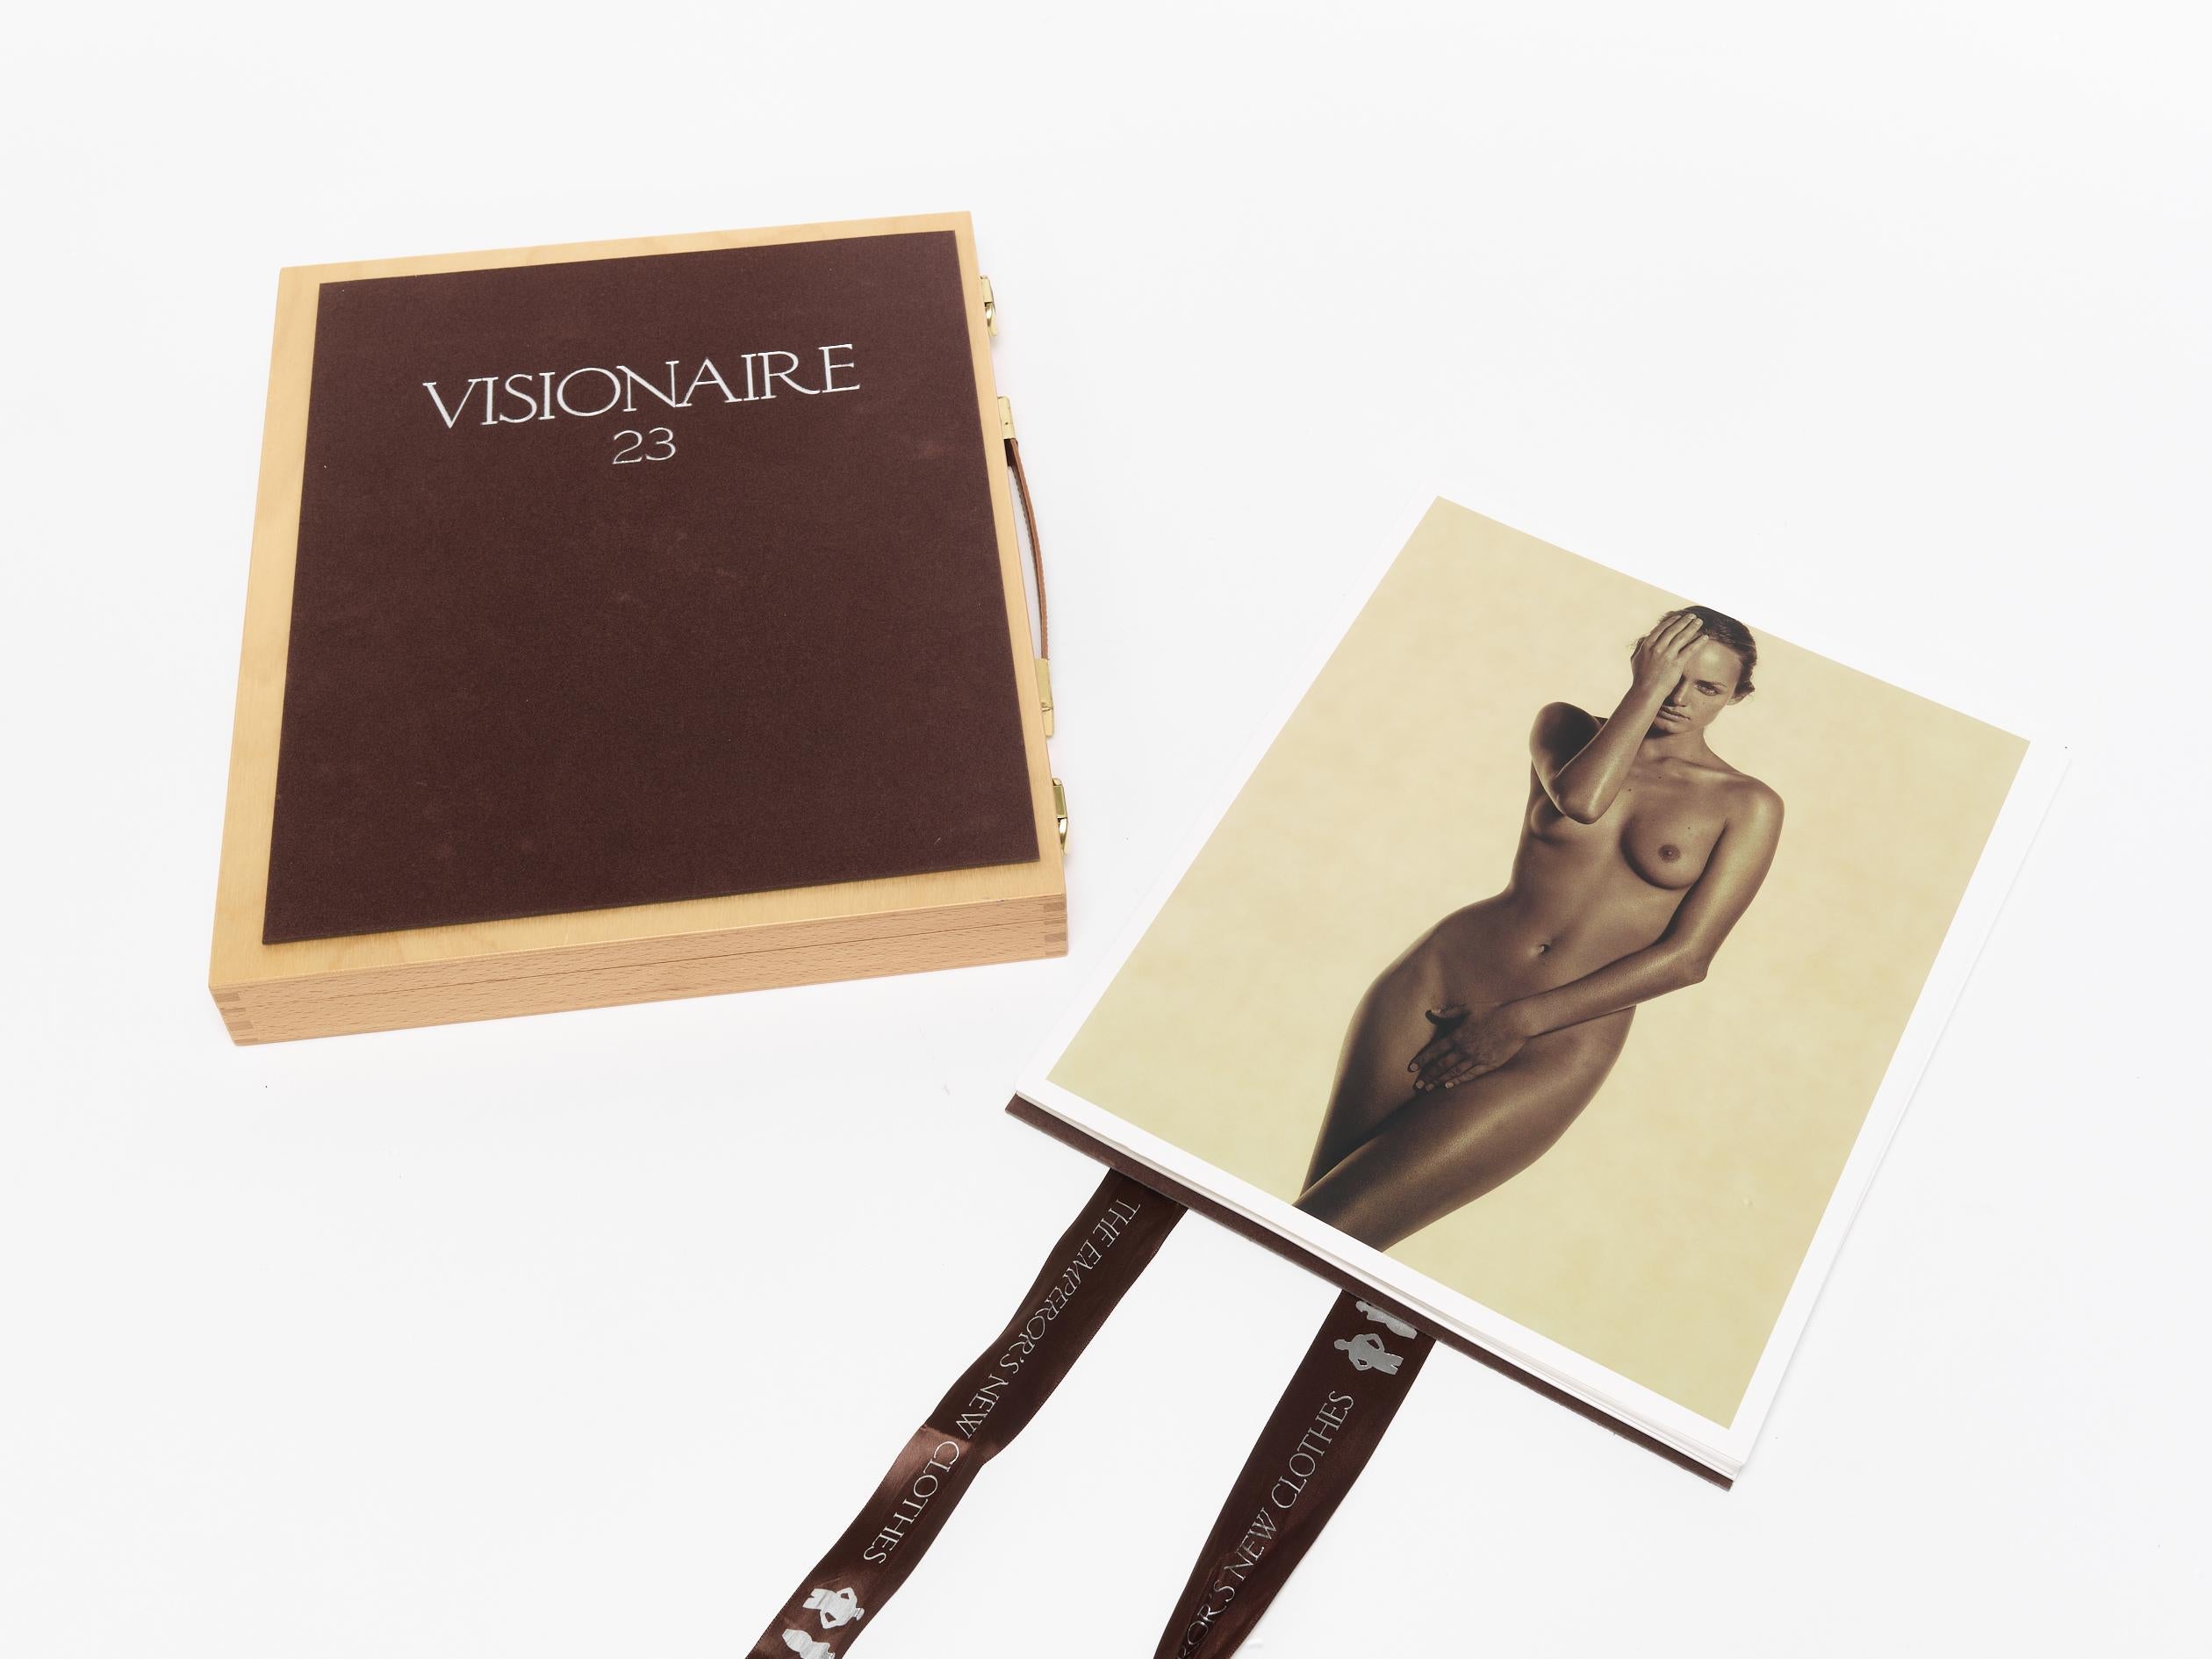 Karl Lagerfeld Nude Print - Visionnaire # 23 The Emperor's new clothes 